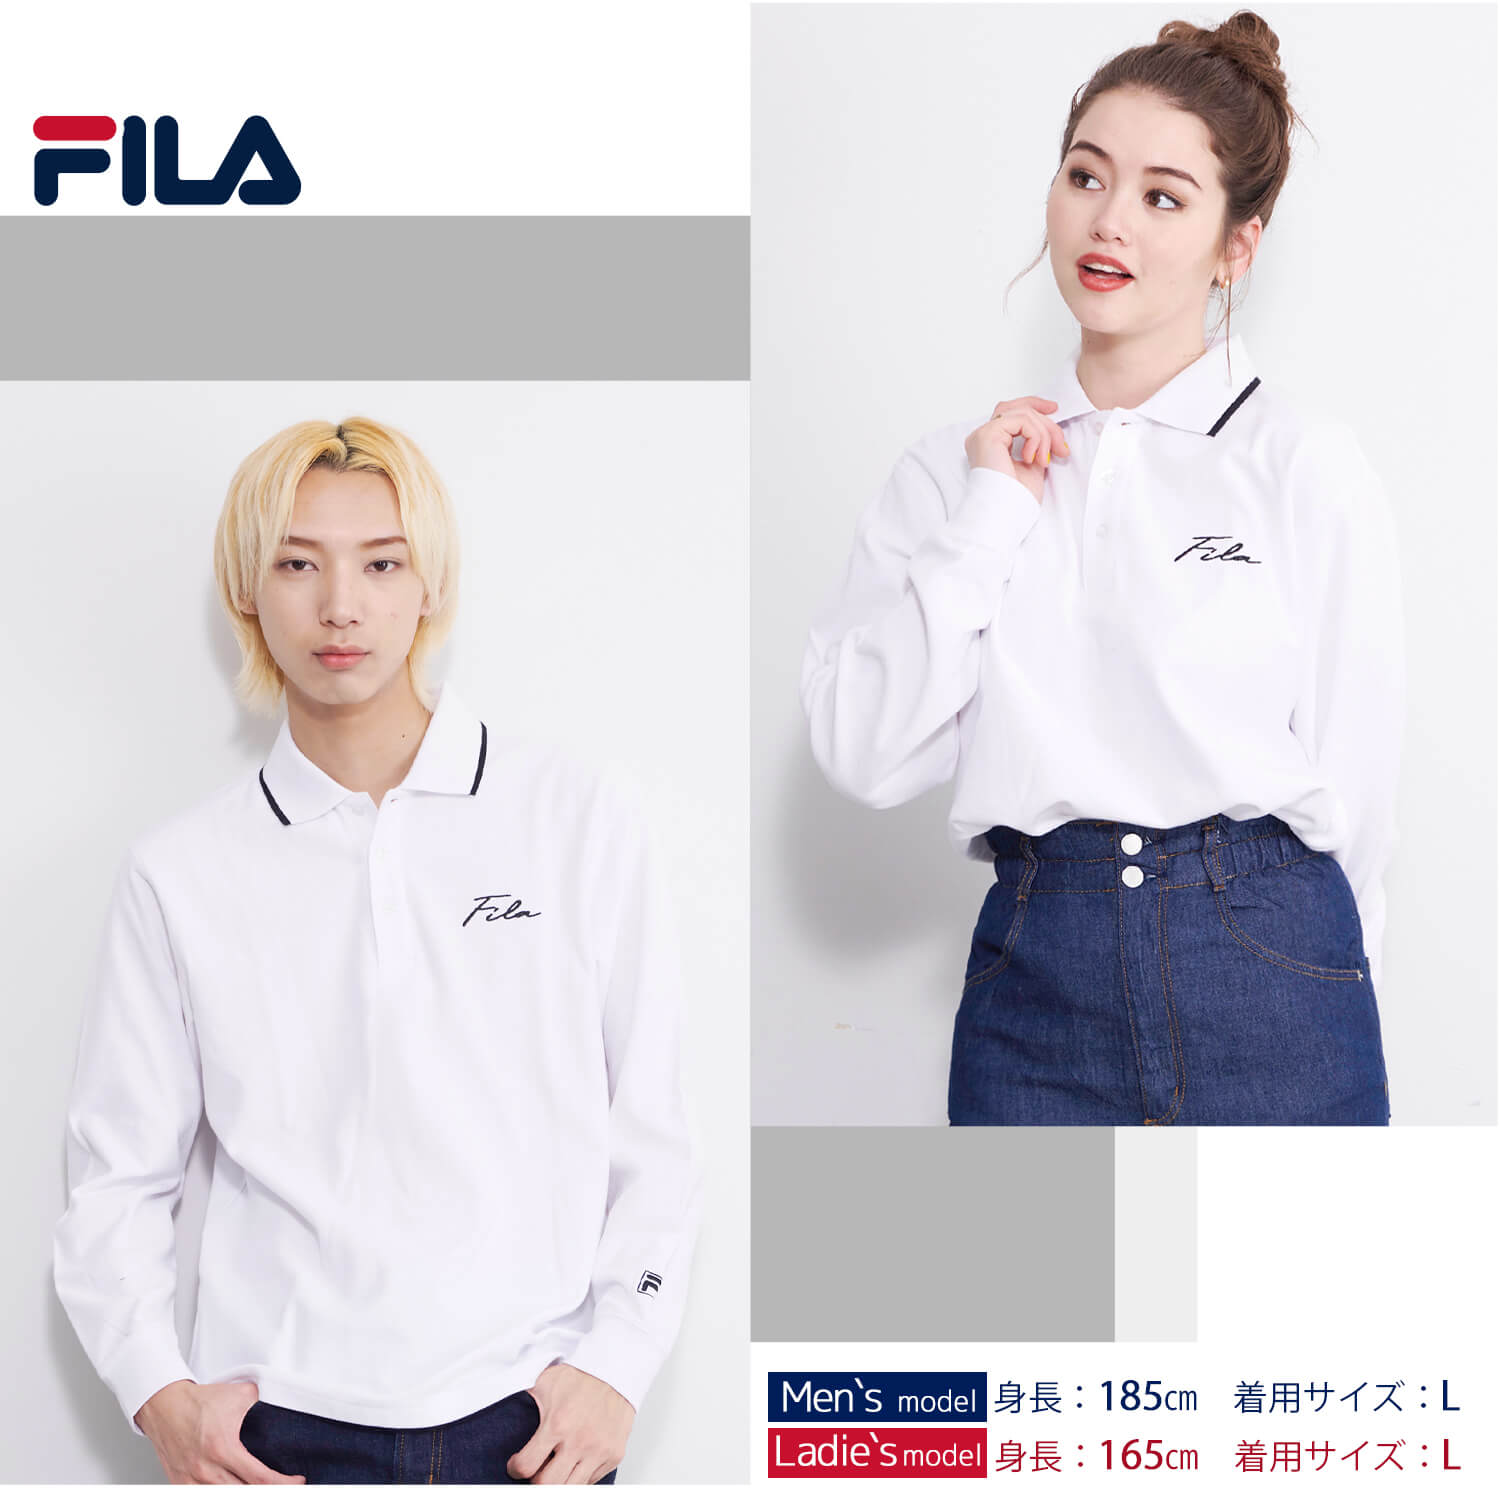 FILA フィラ ポロシャツ 長袖 メンズ 綿 無地 鹿の子 大きいサイズ 4L 5L 筆記体ロゴ 刺繍 衿ライン karlas｜outfit-style｜03